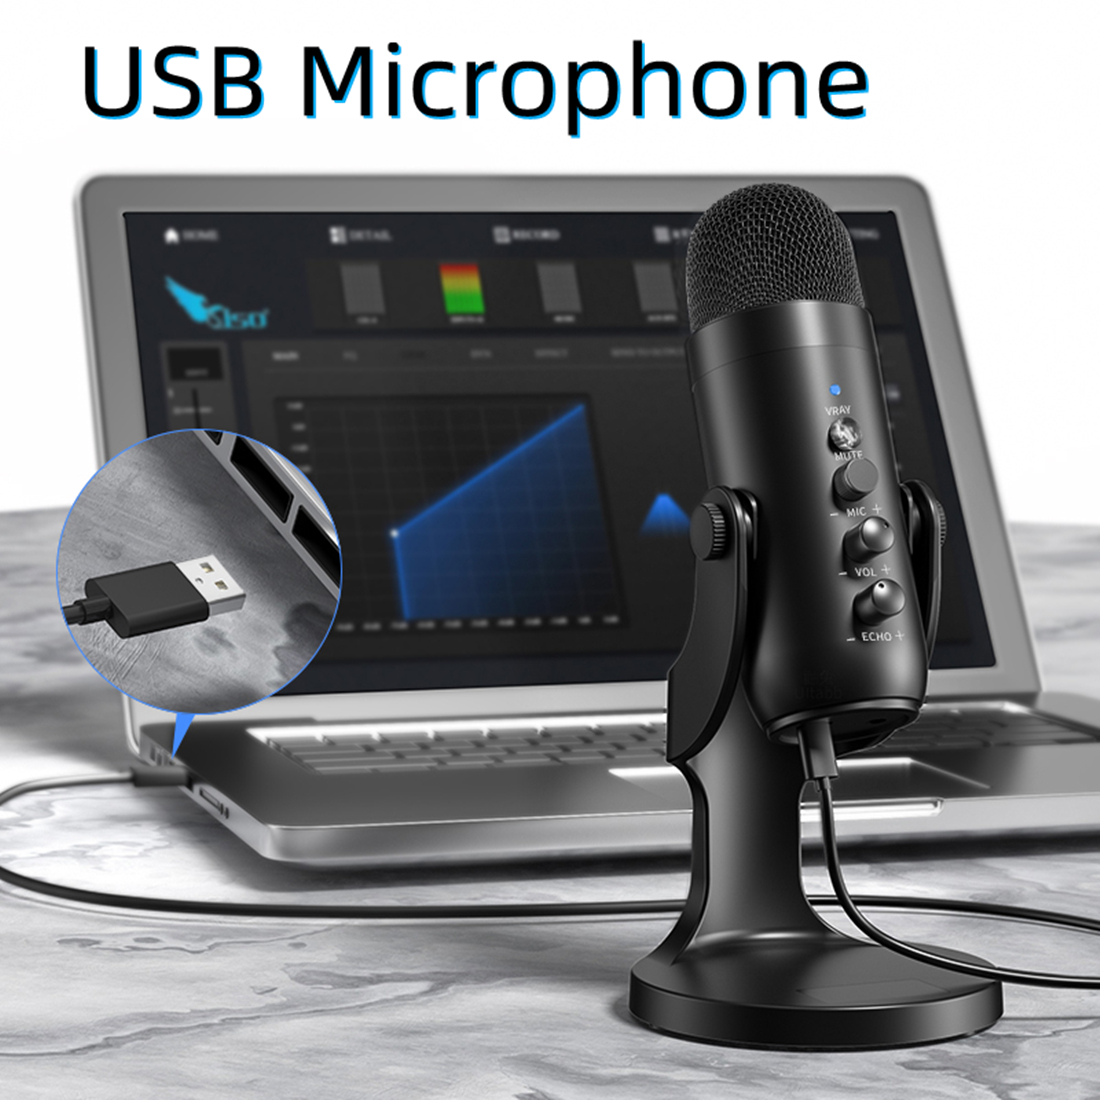 FiFine USB Metal Condenser Recording Microphone; For Laptop MAC or Windows  Cardioid Studio Recording Vocals, Voice Overs, - Micro Center